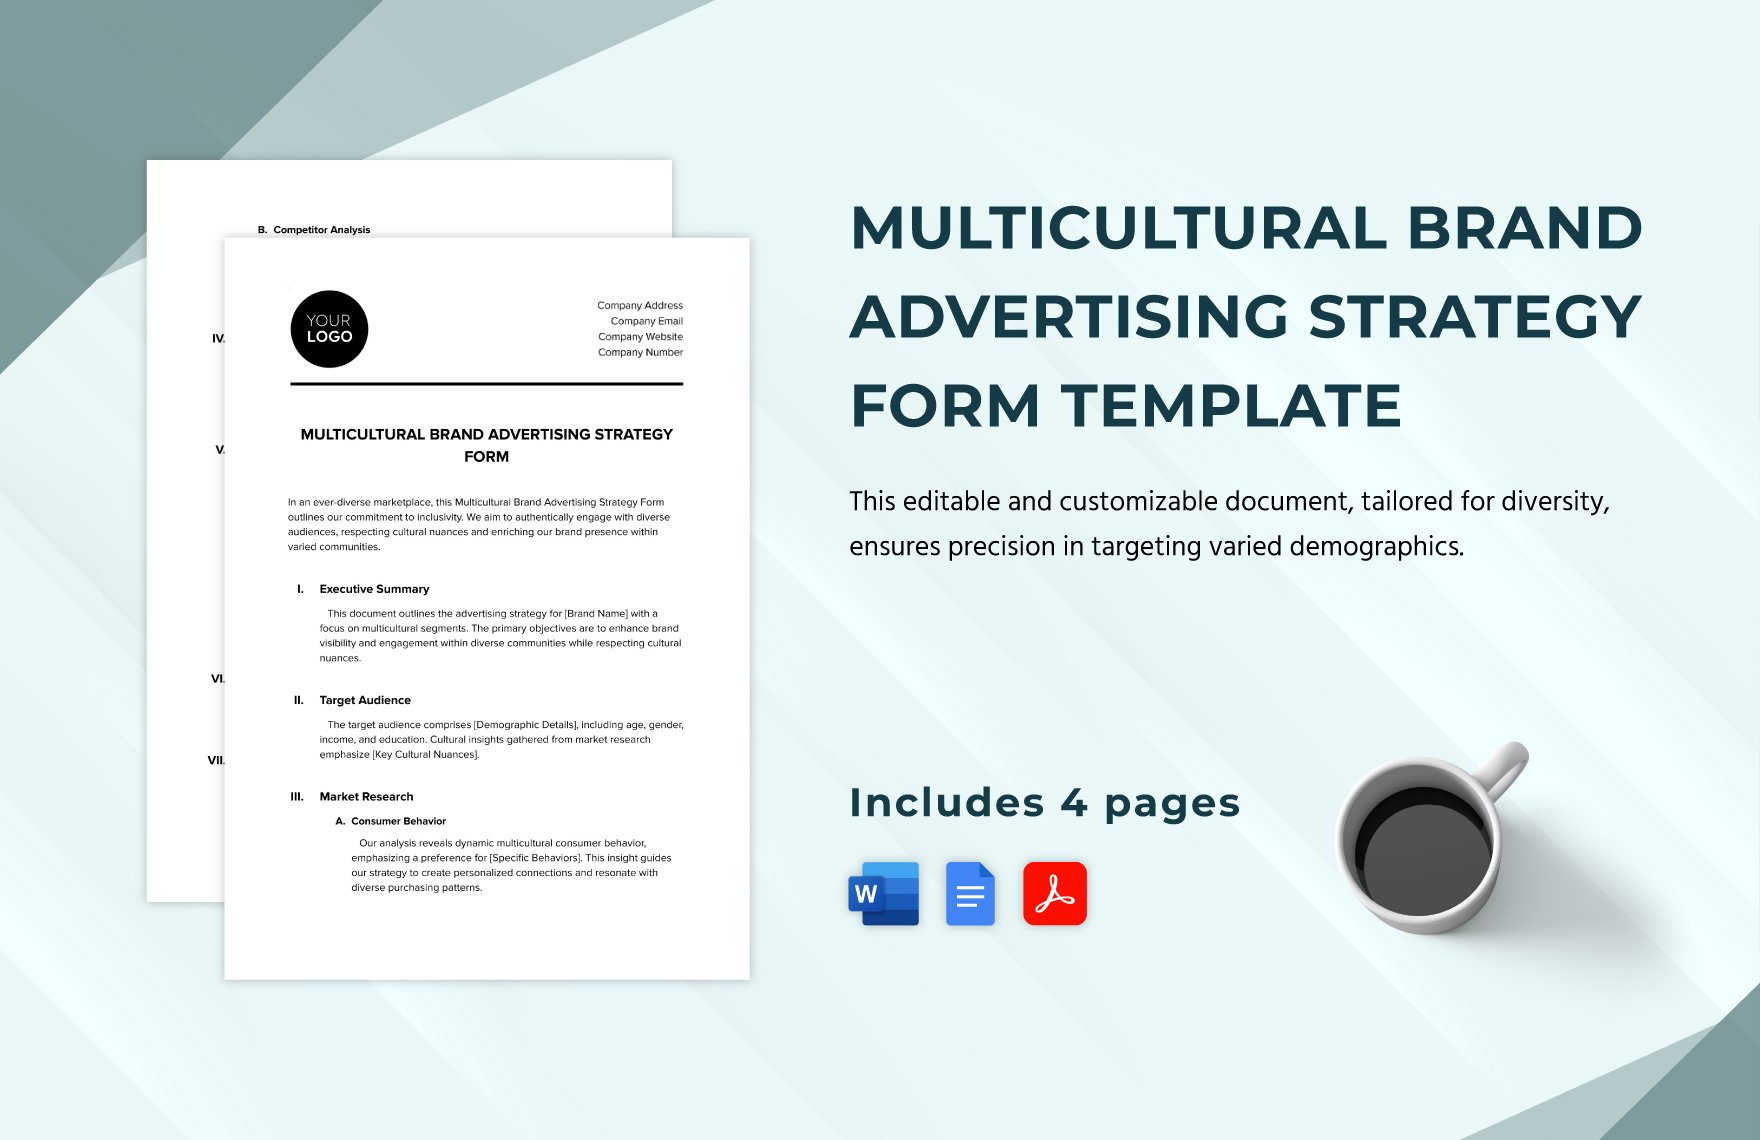 Multicultural Brand Advertising Strategy Form Template